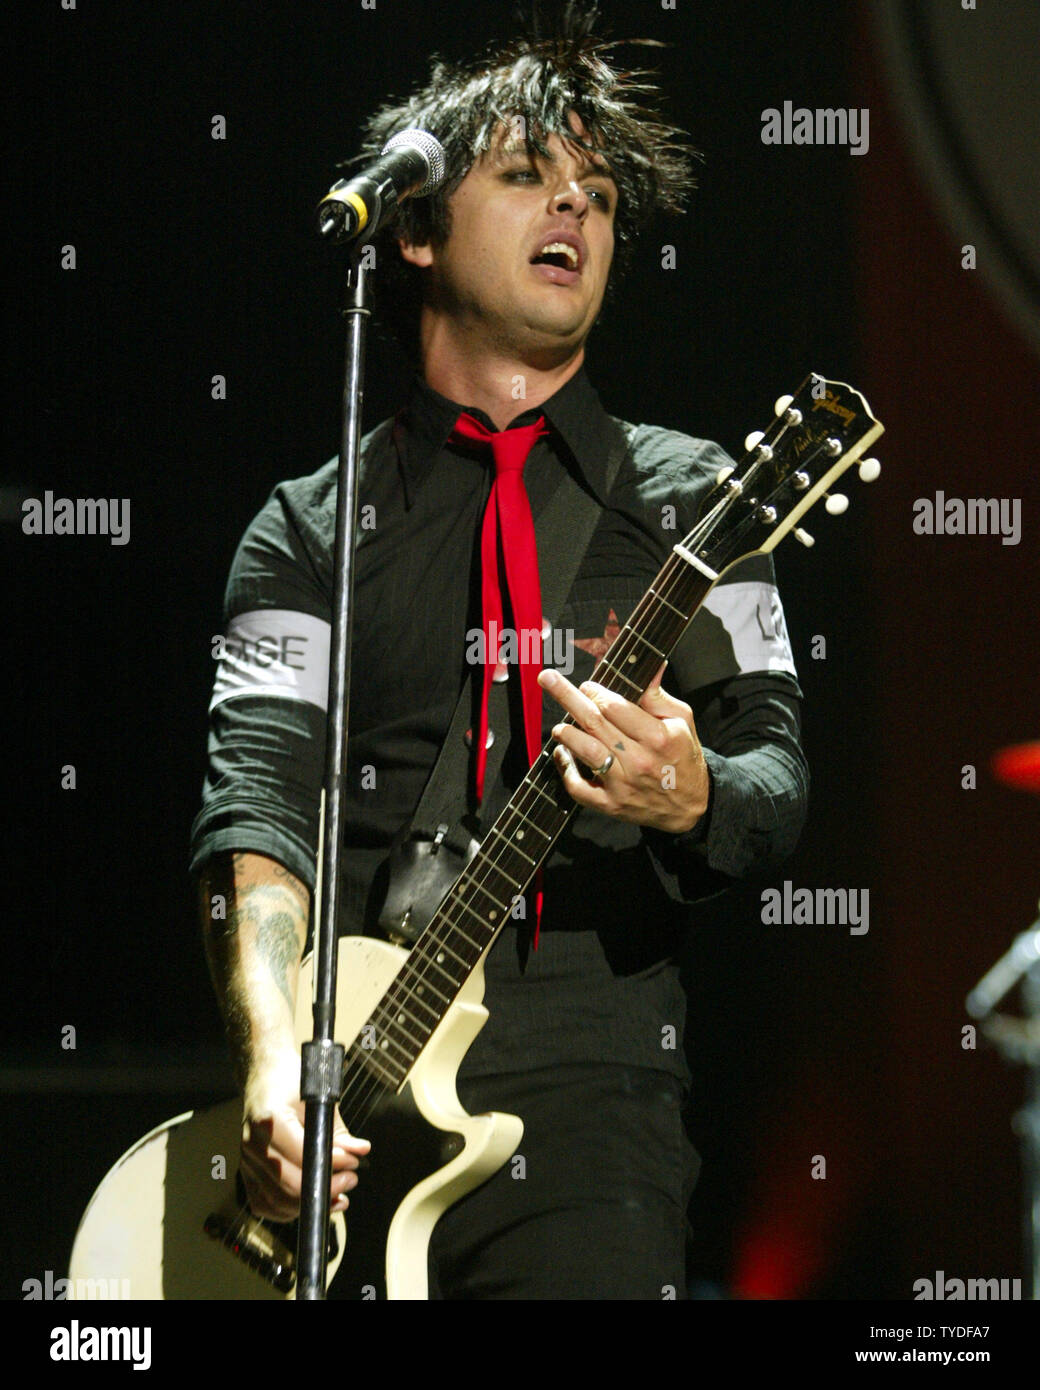 Billie Joe Armstrong with Green Day performs in concert, at the Office Depot Center, in Sunrise,  Florida, on August 26, 2005.  (UPI Photo/Michael Bush) Stock Photo